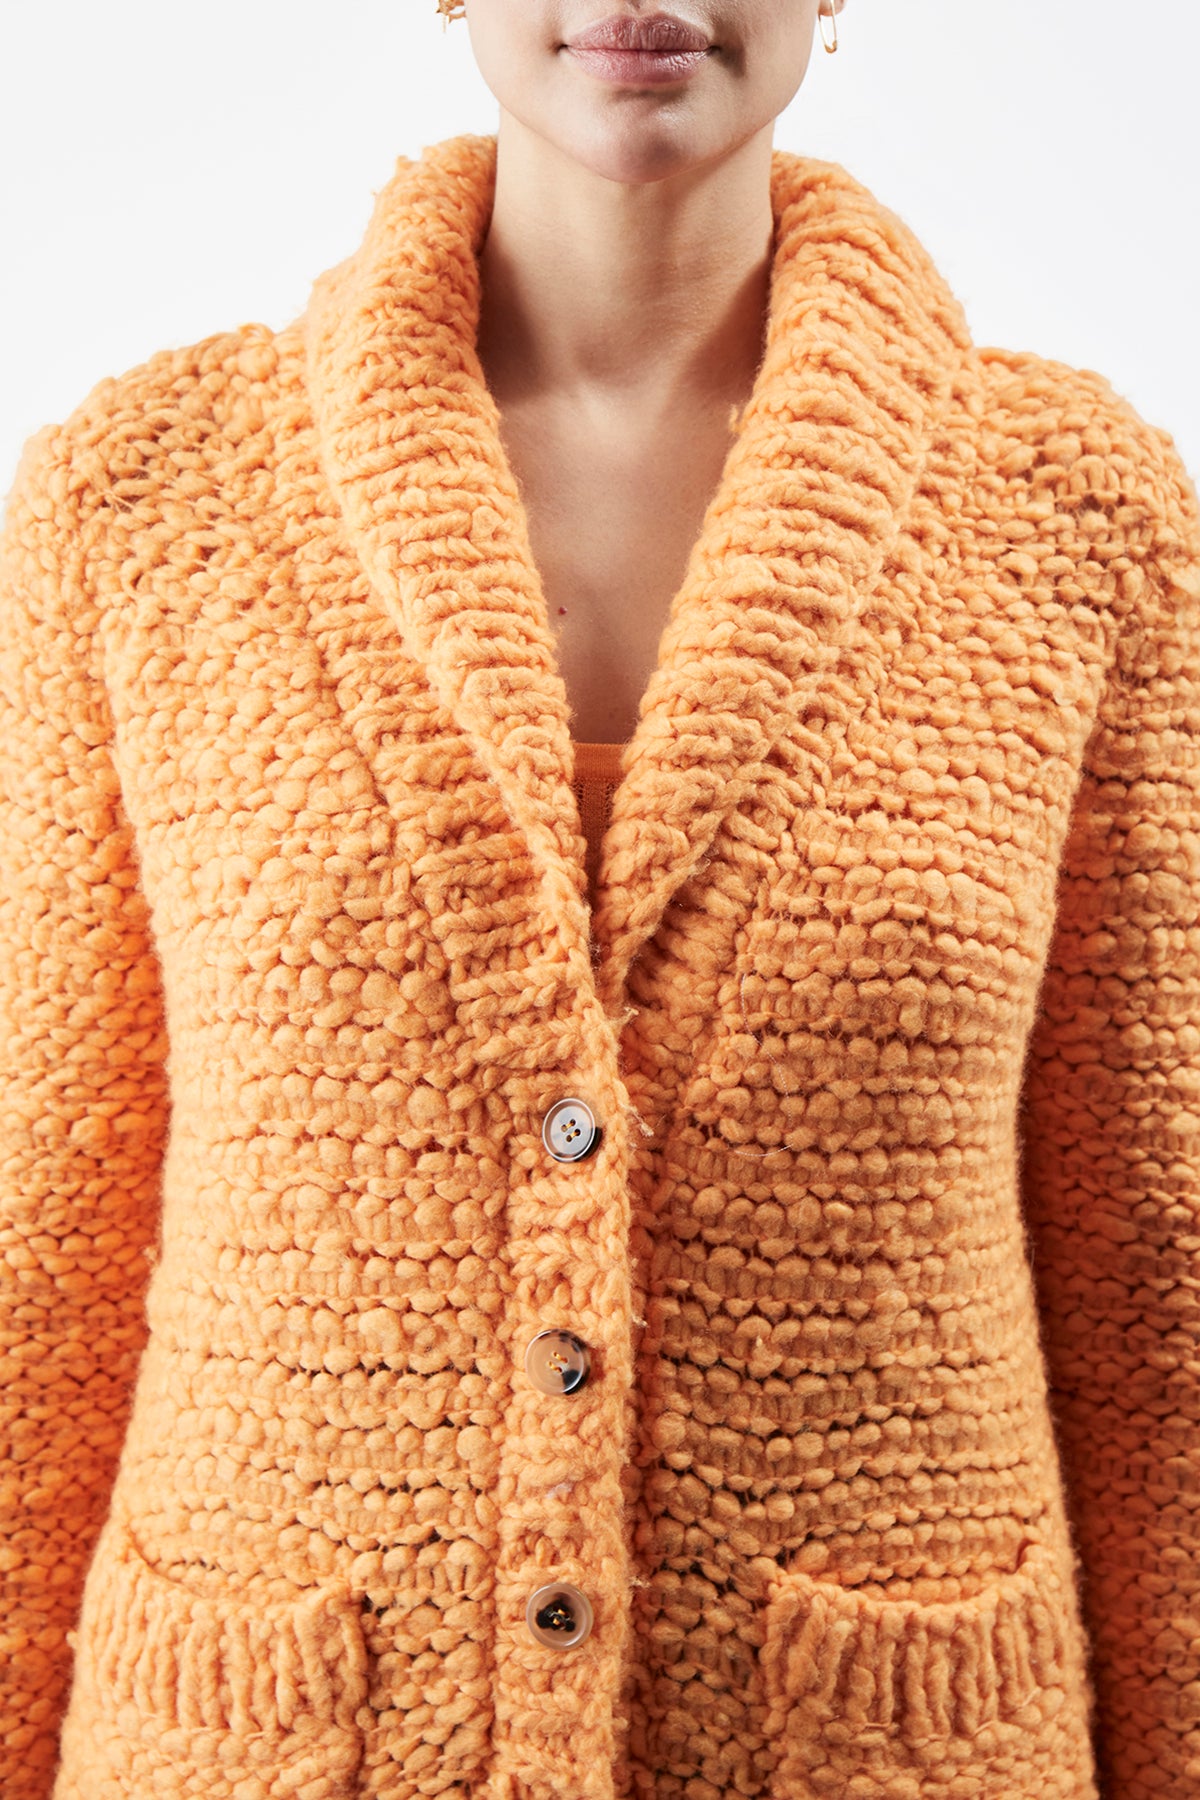 Moses Knit Cardigan in Fluorescent Orange Welfat Cashmere